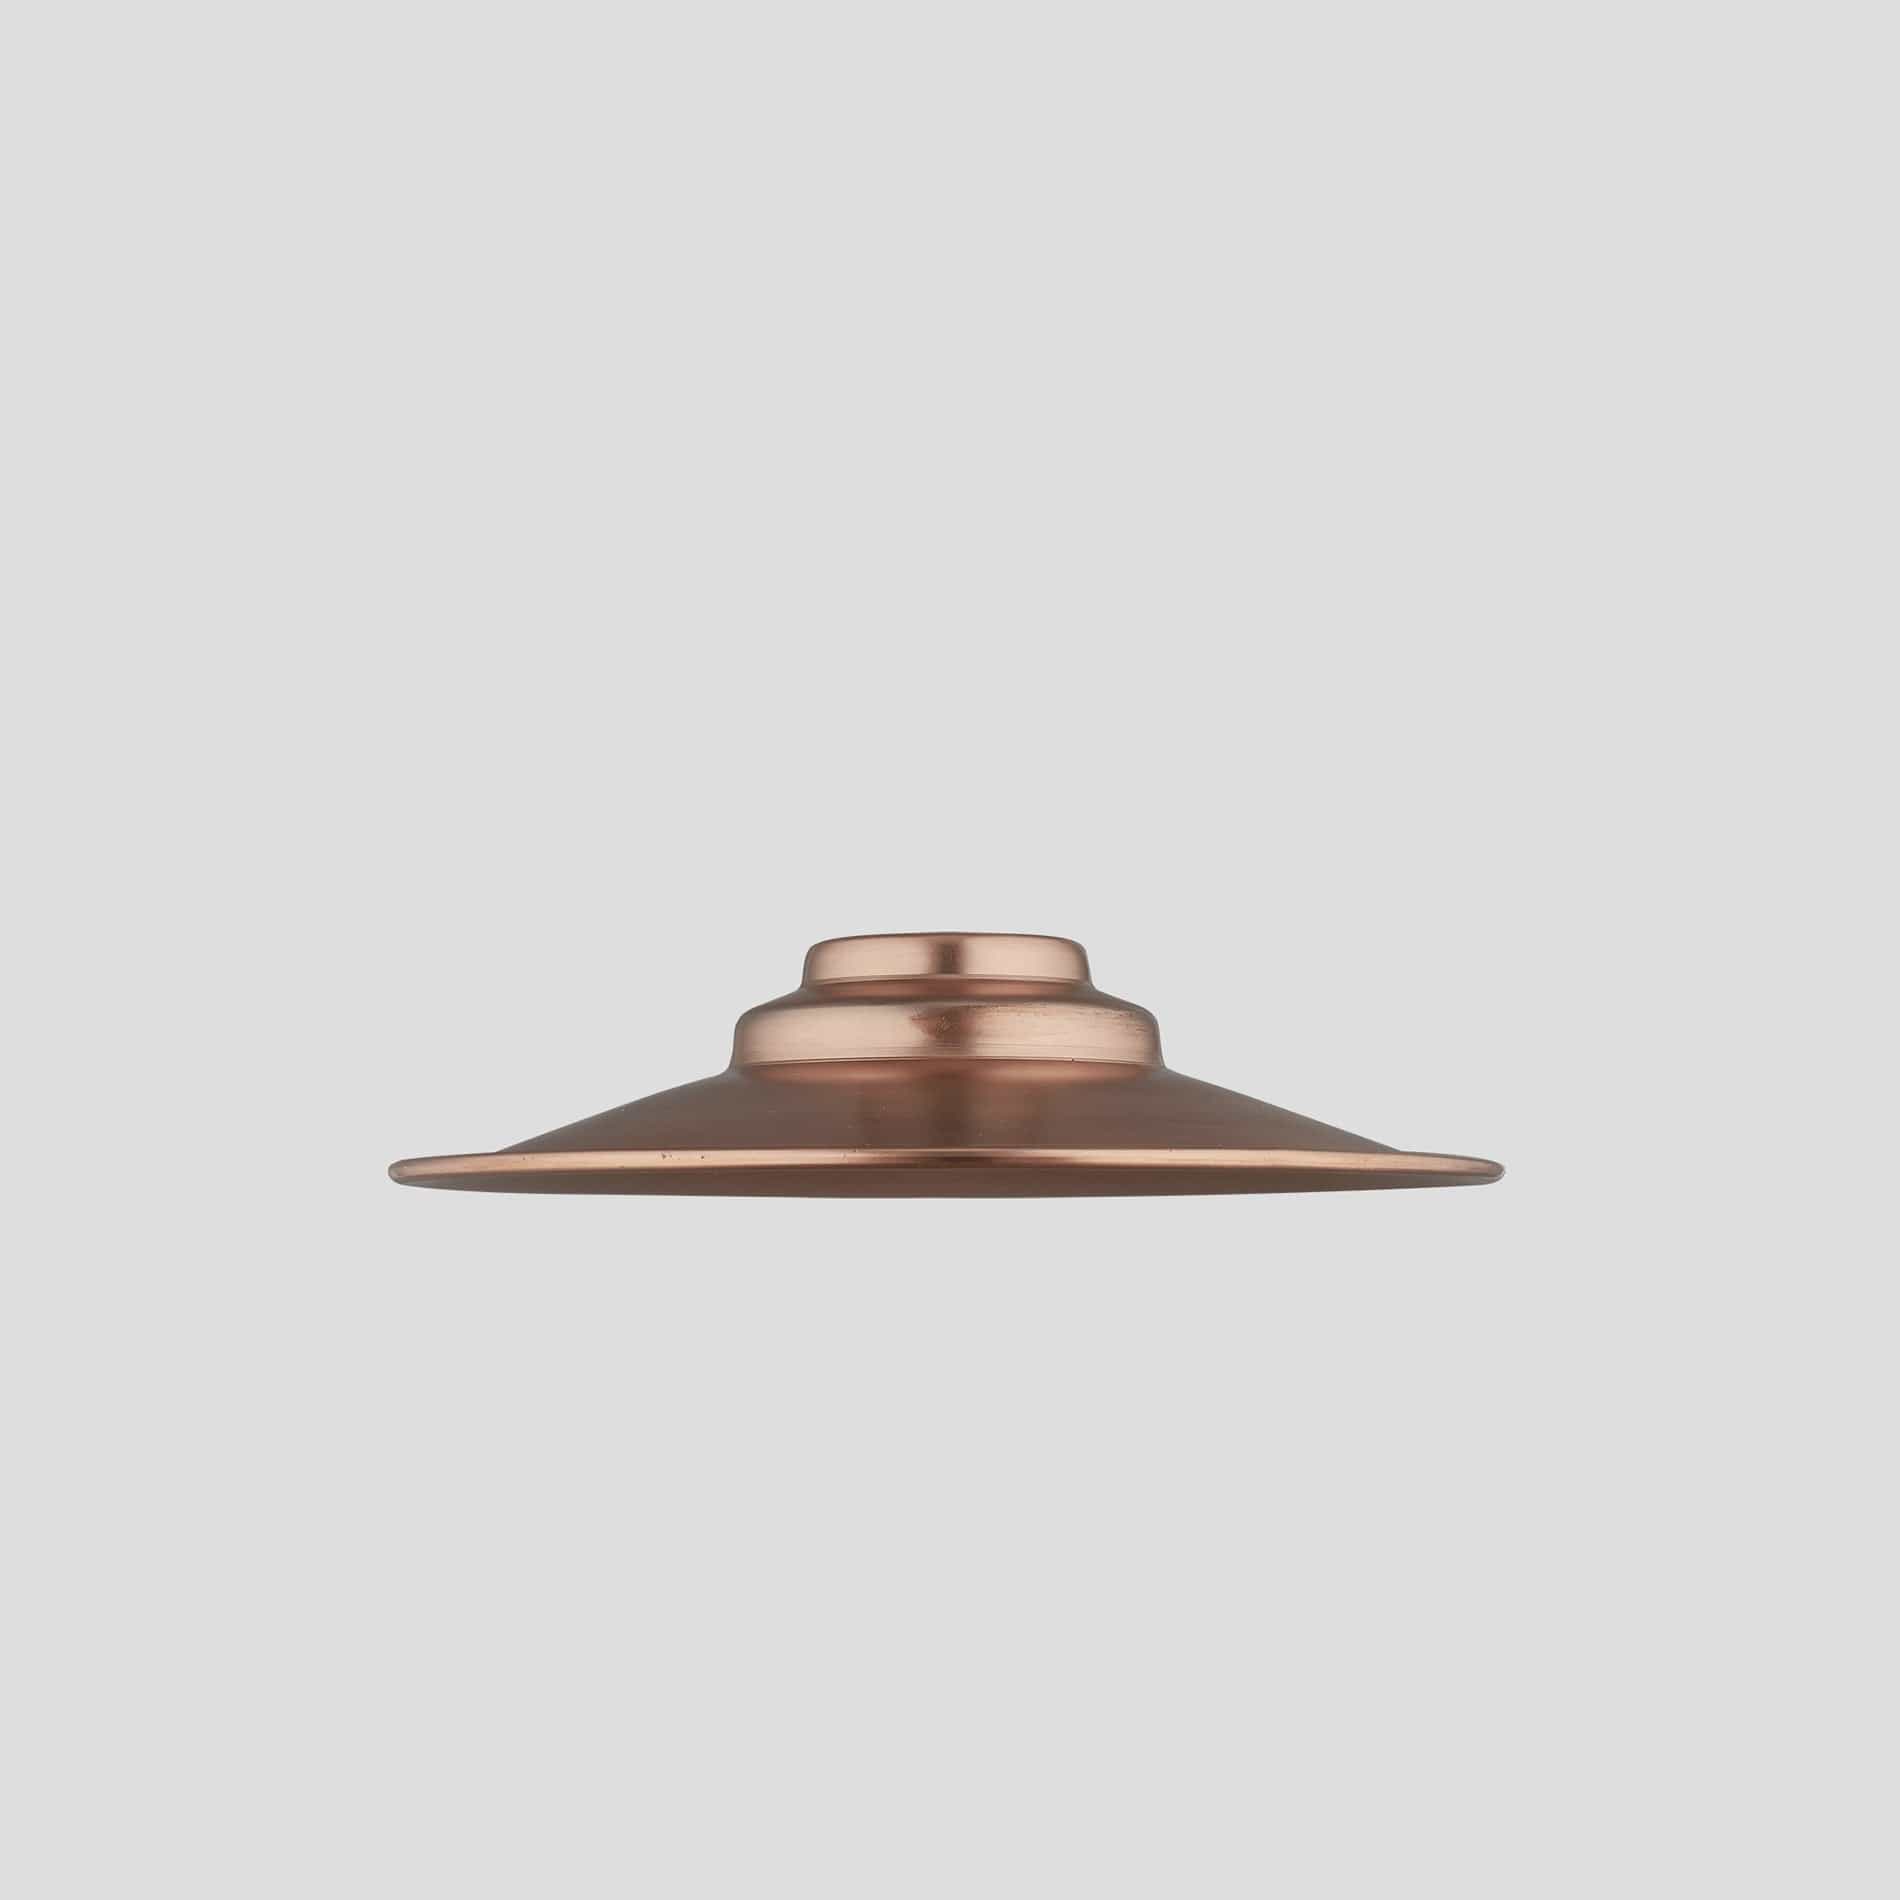 Flat - 8 Inch - Copper - Shade Only Industville F8-C-SO